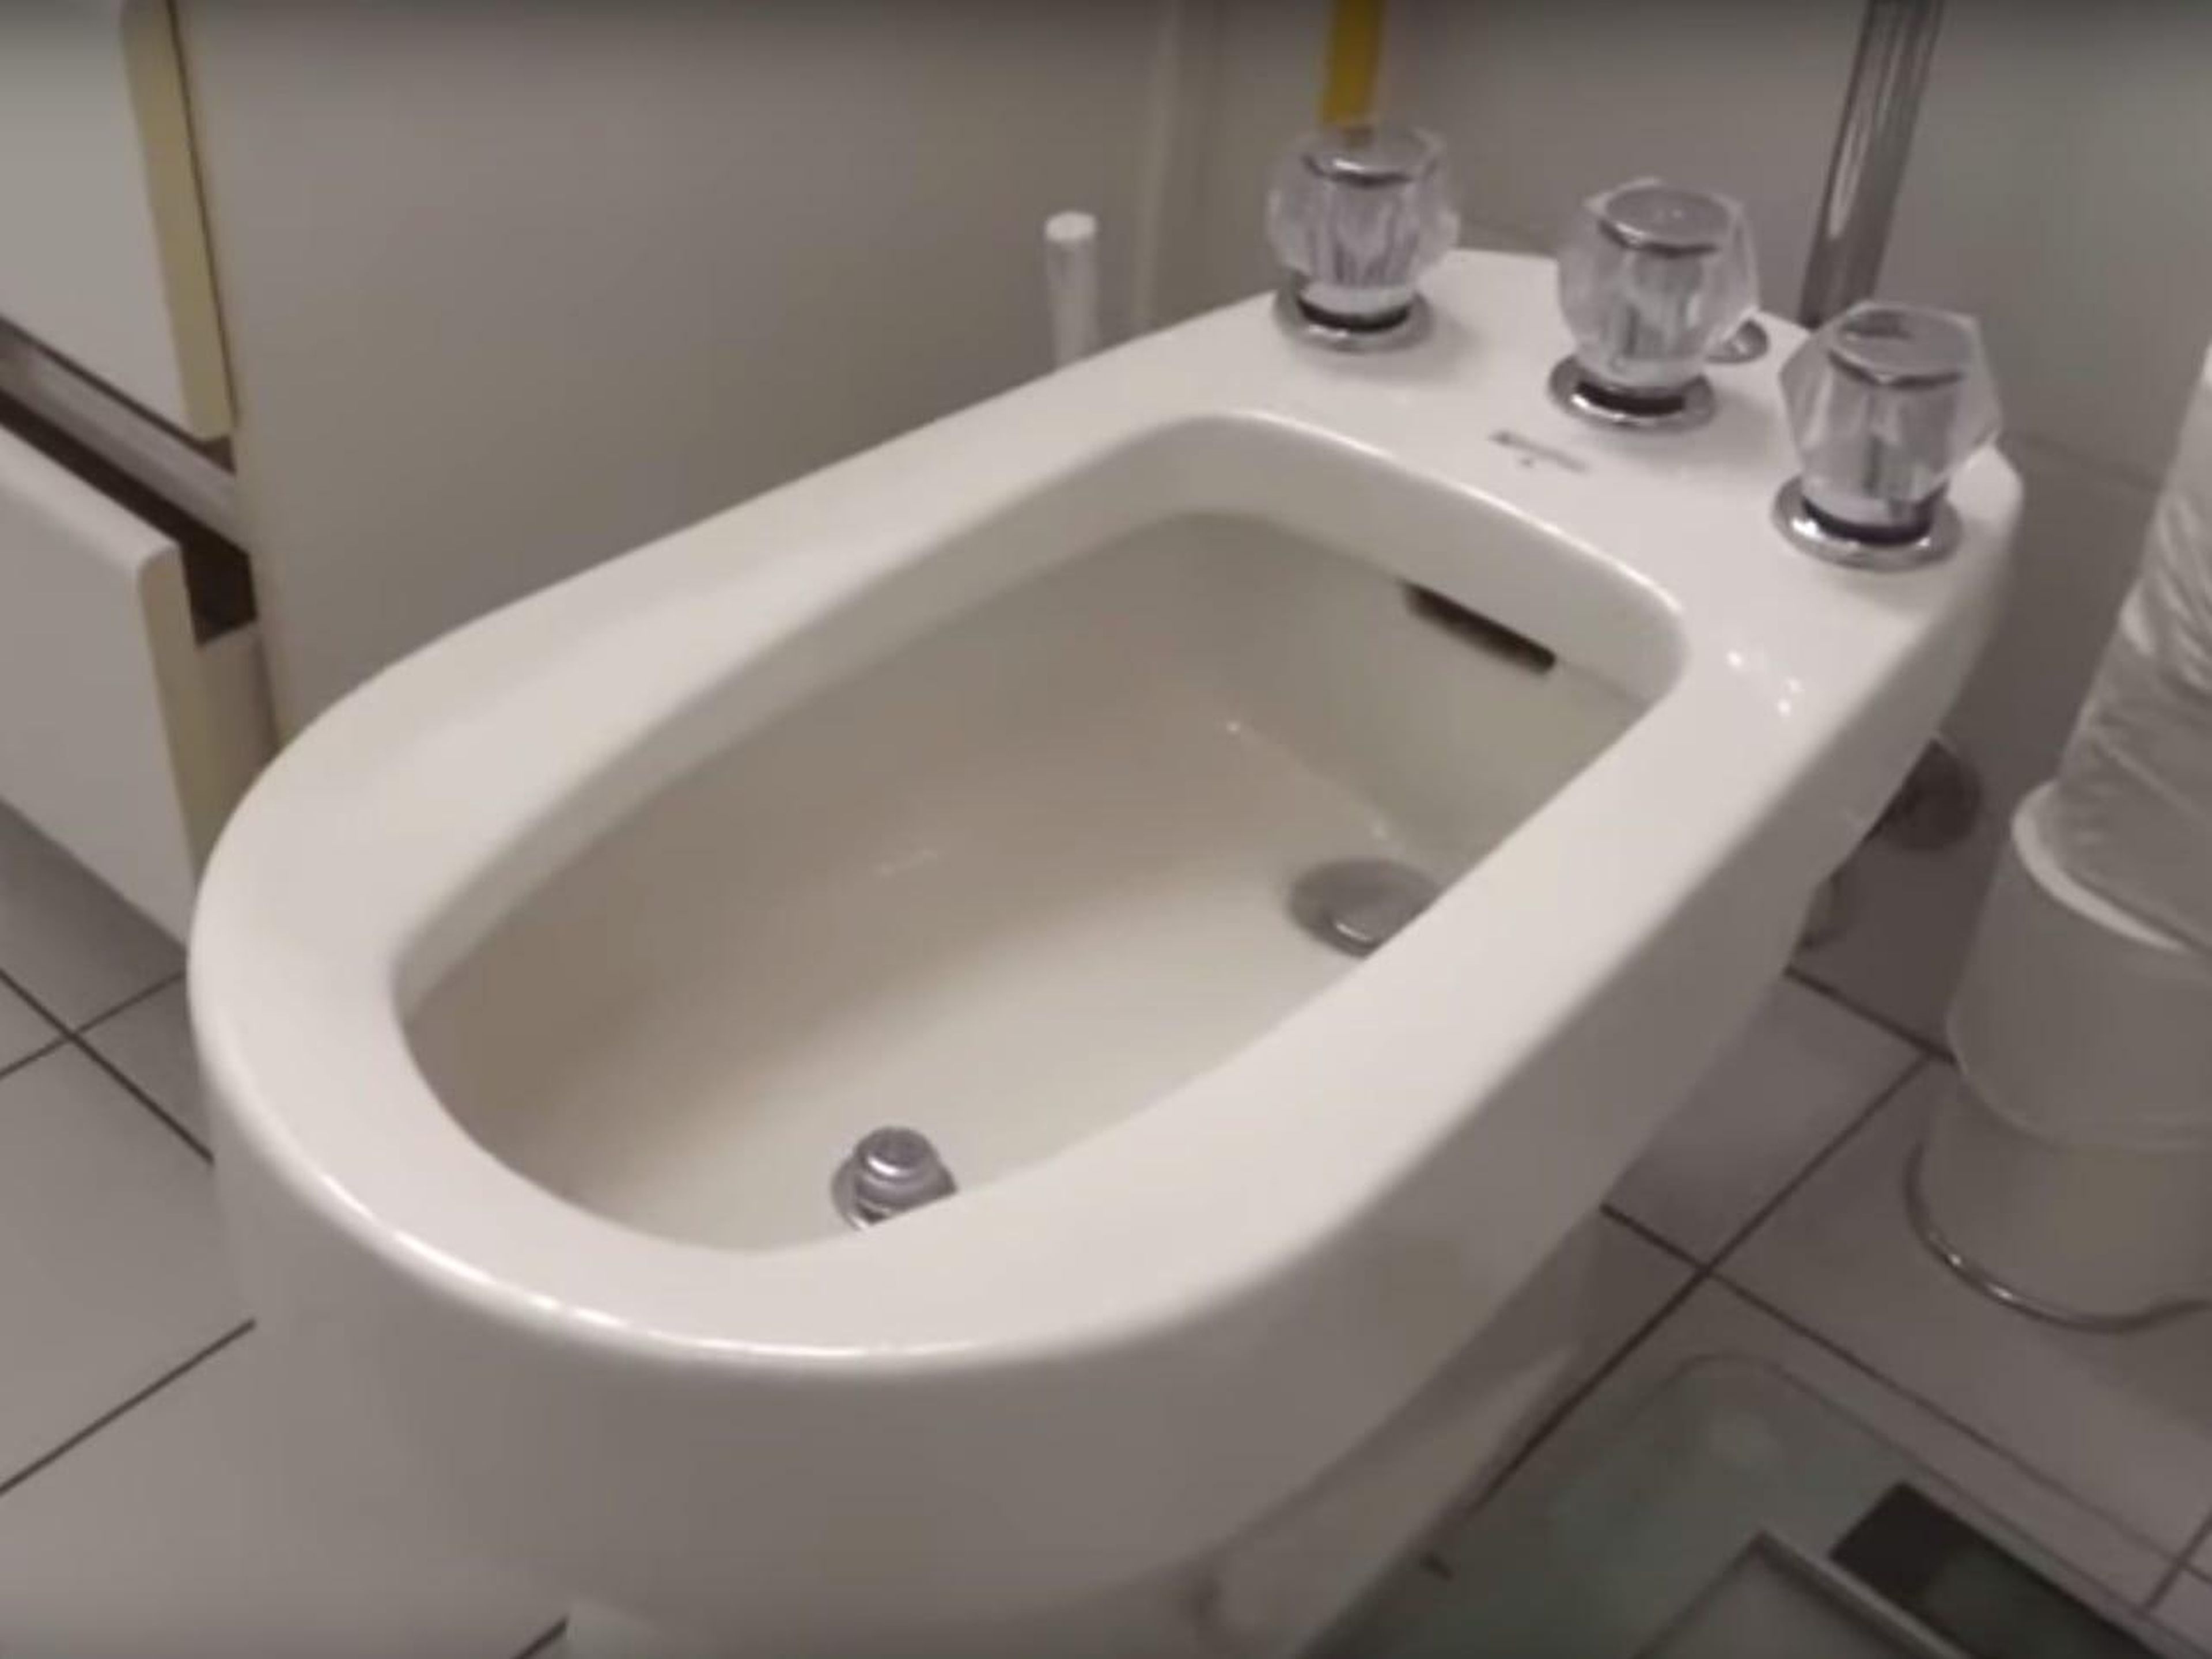 Bidets, which also don't require toilet paper, have also caught on. One of Australia's biggest bidet distributors said enquiries had tripled since the toilet-paper rush.